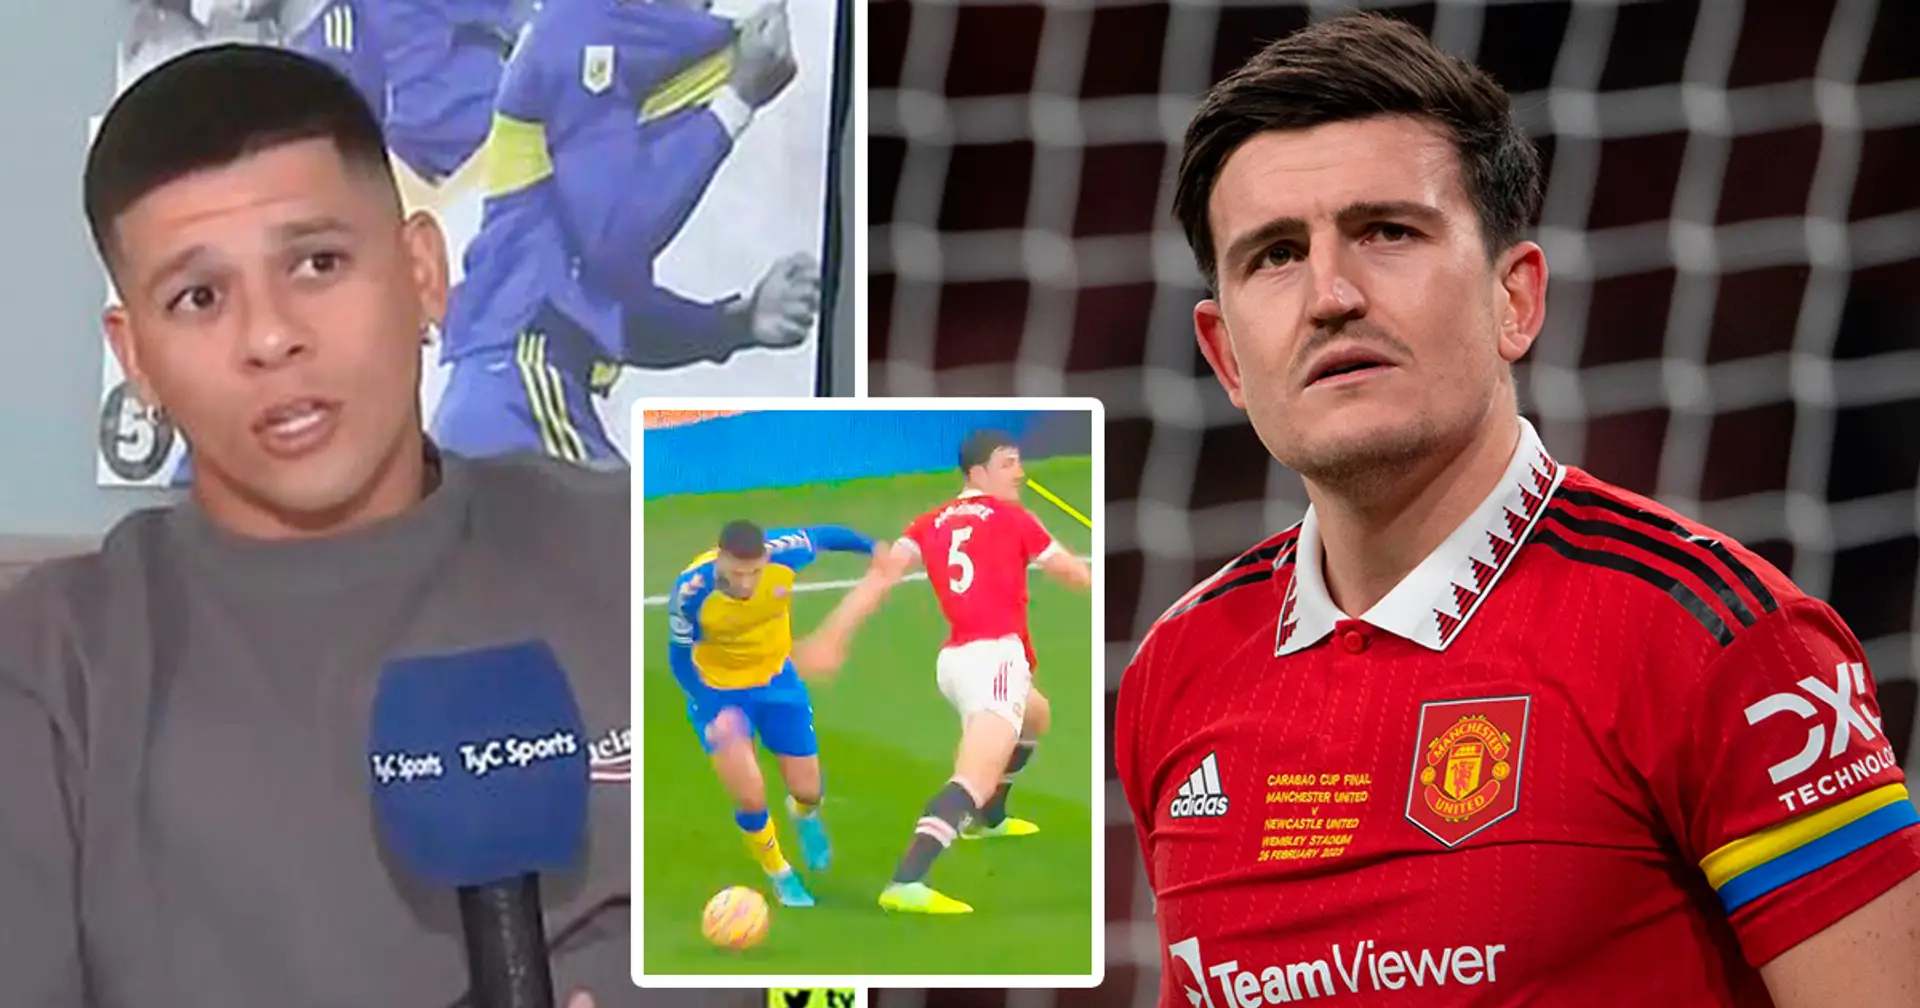 'The coach told me that Maguire had to play because of the money they paid for him': Rojo absolutely destroys Maguire and former coach in honest interview  